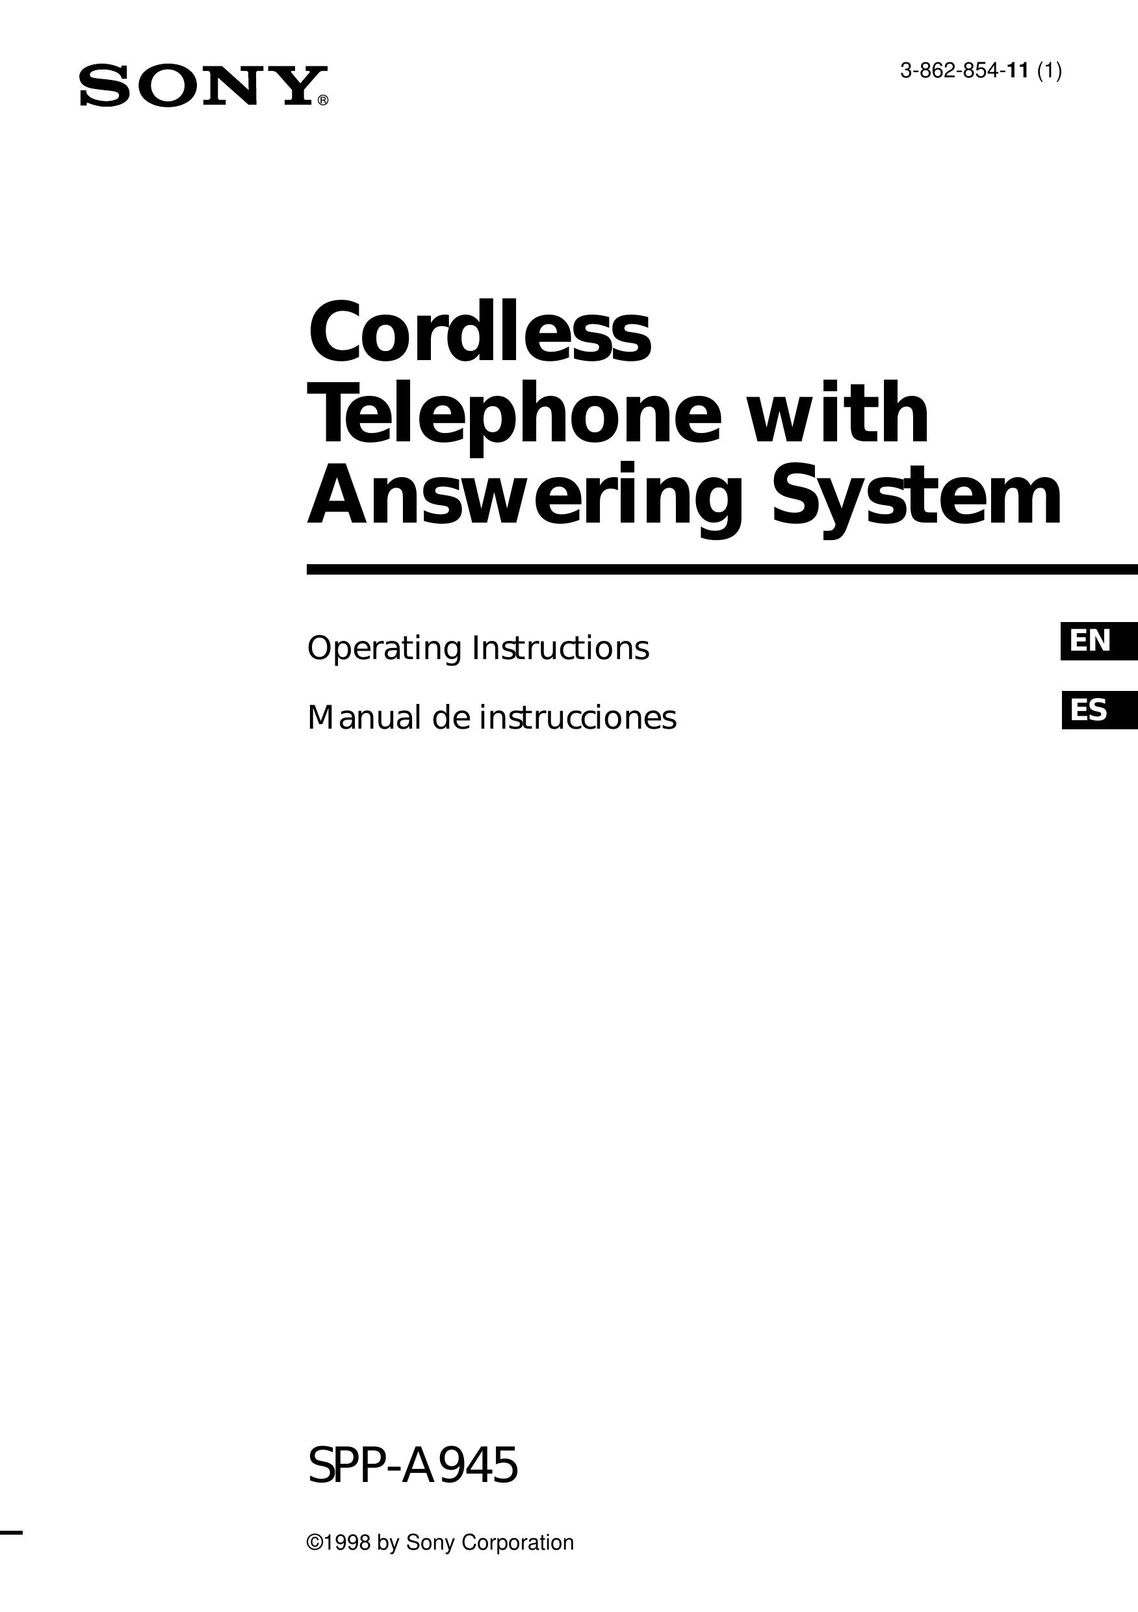 Sony SPP-A945 Cordless Telephone User Manual